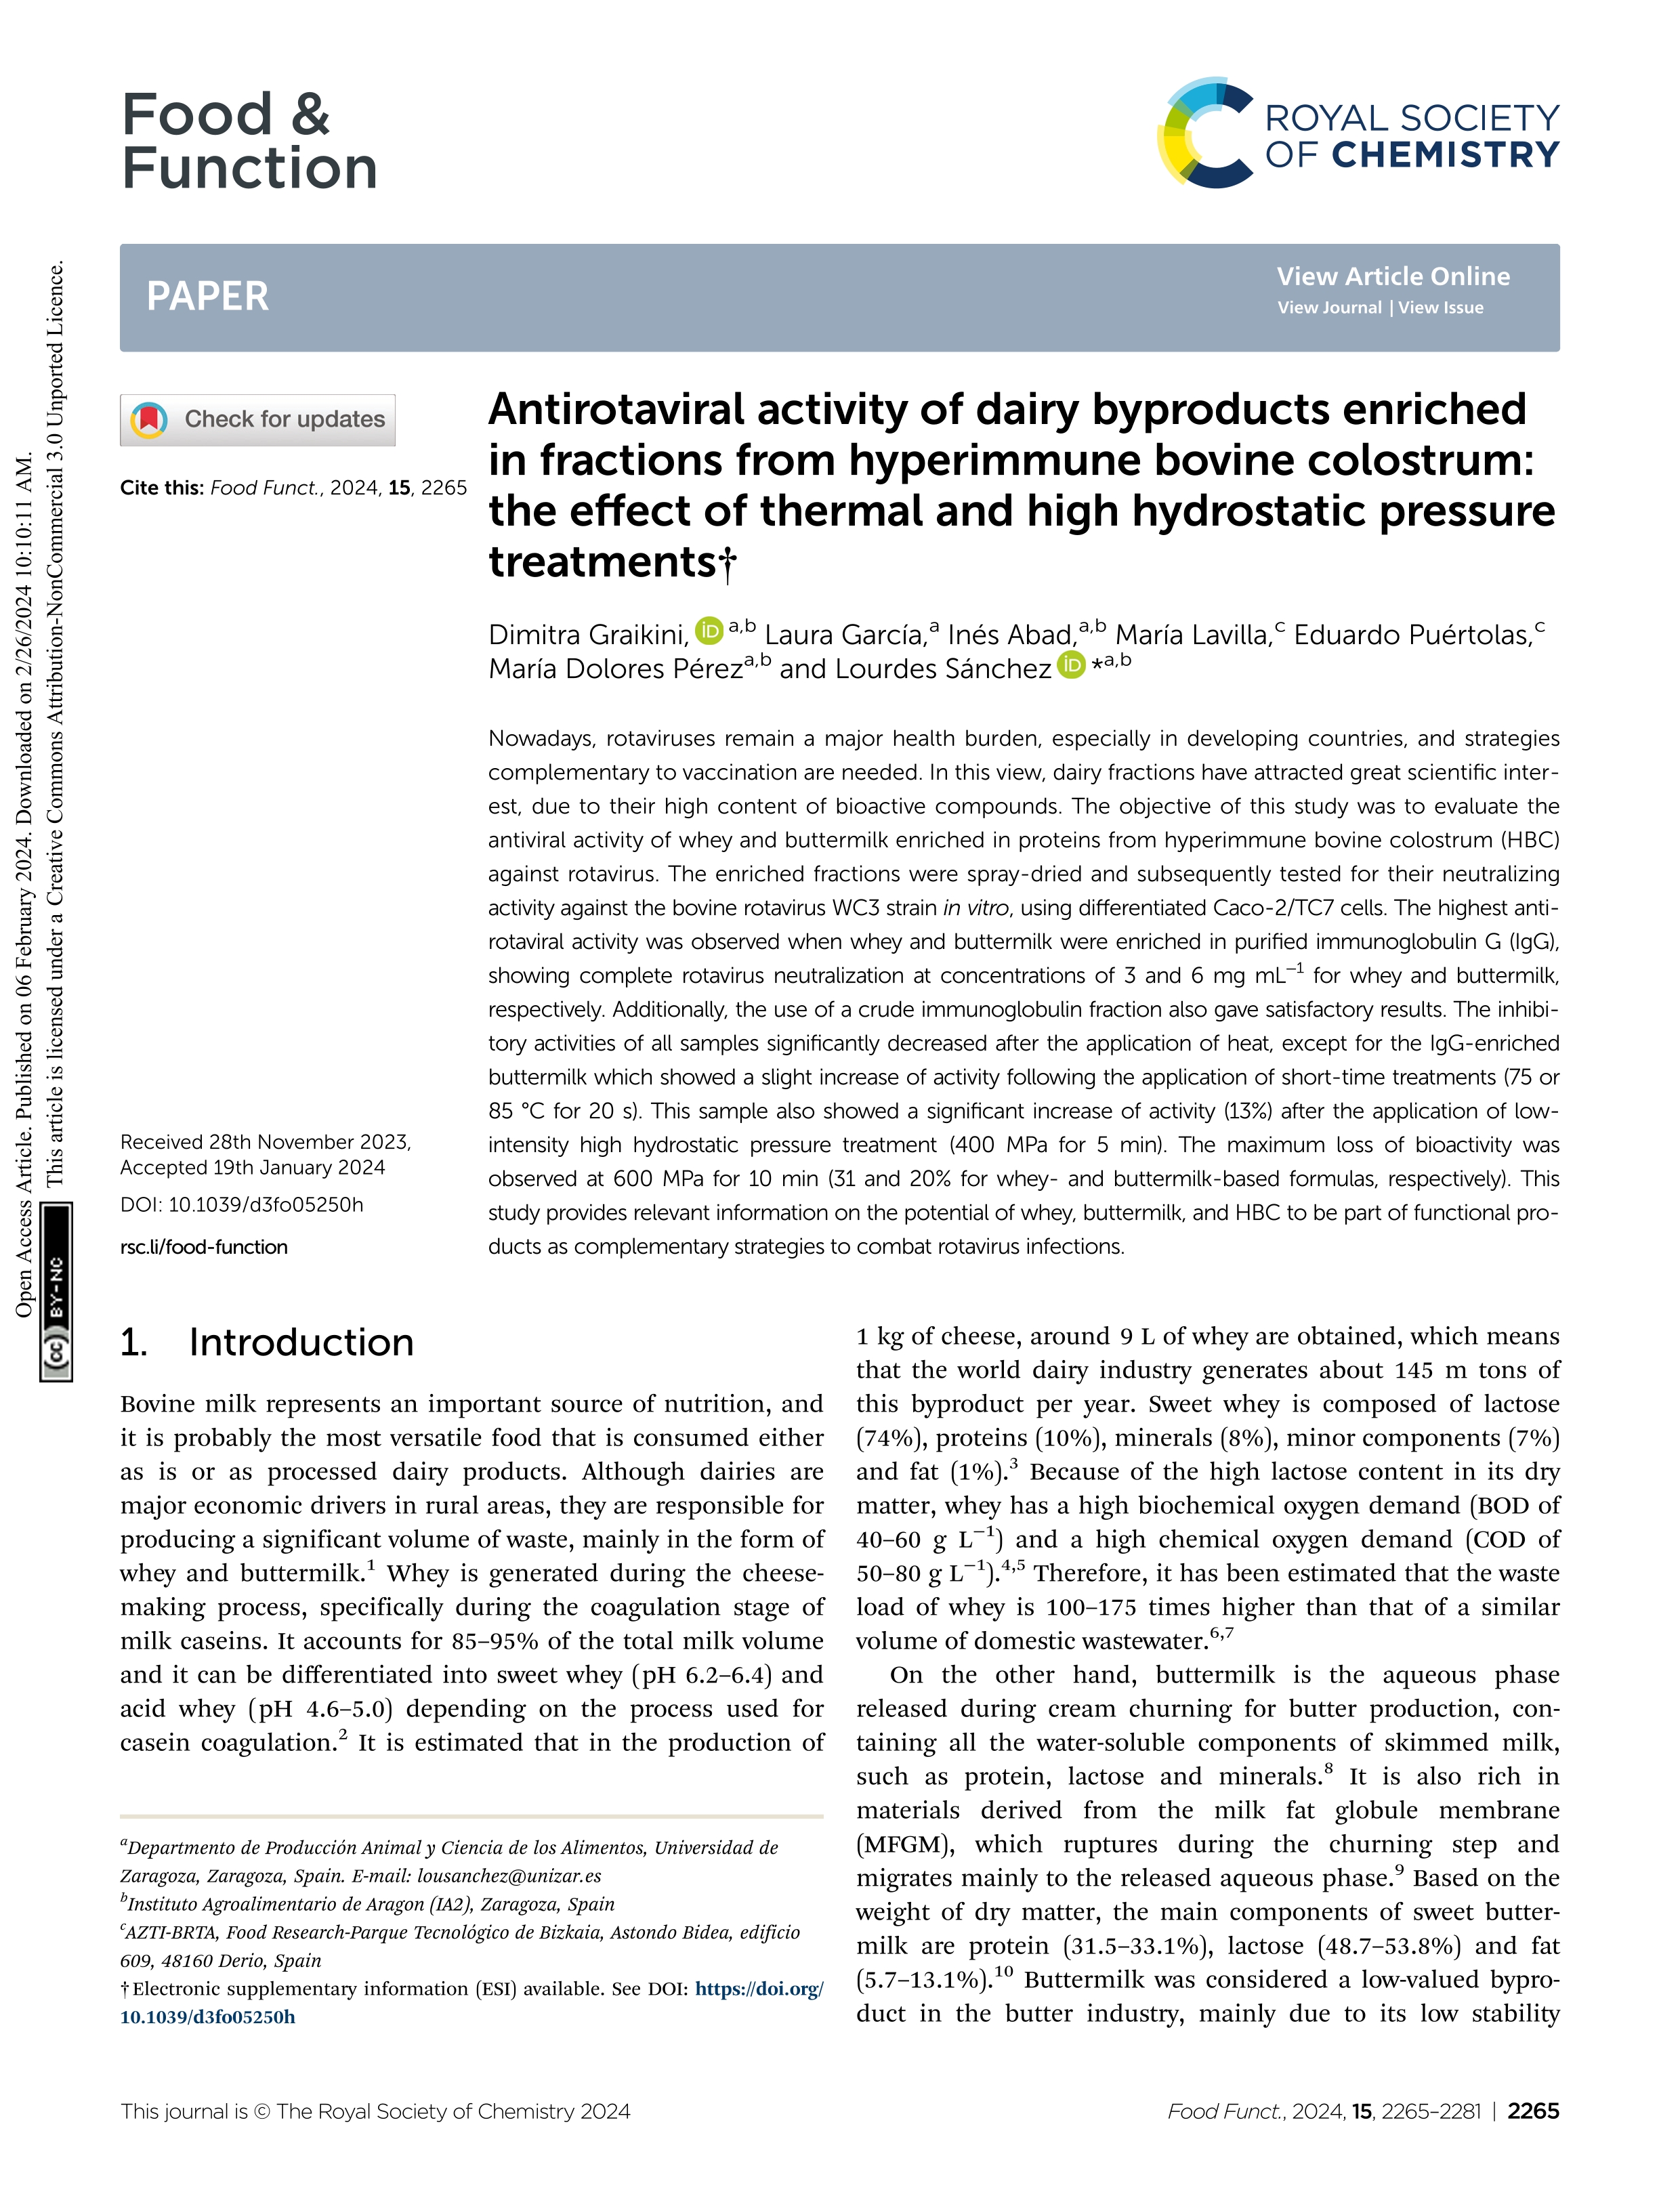 Antirotaviral activity of dairy byproducts enriched in fractions from hyperimmune bovine colostrum: the effect of thermal and high hydrostatic pressure treatments